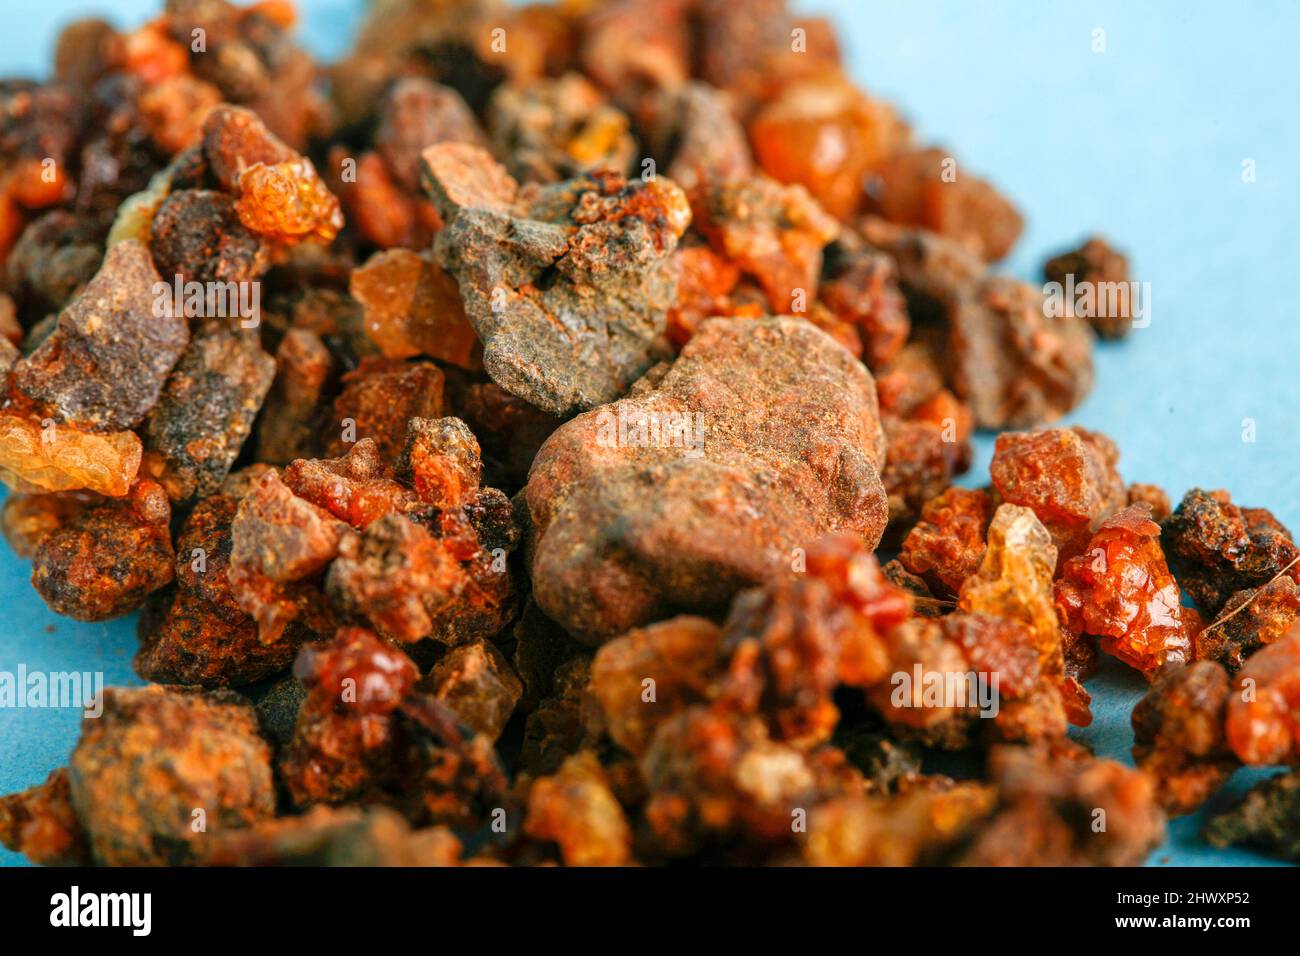 Myrrh is the dried sap of the tree Commiphora myrrha, native to Somalia and eastern Ethiopia. According to Chinese medicine experts it can affect the Stock Photo